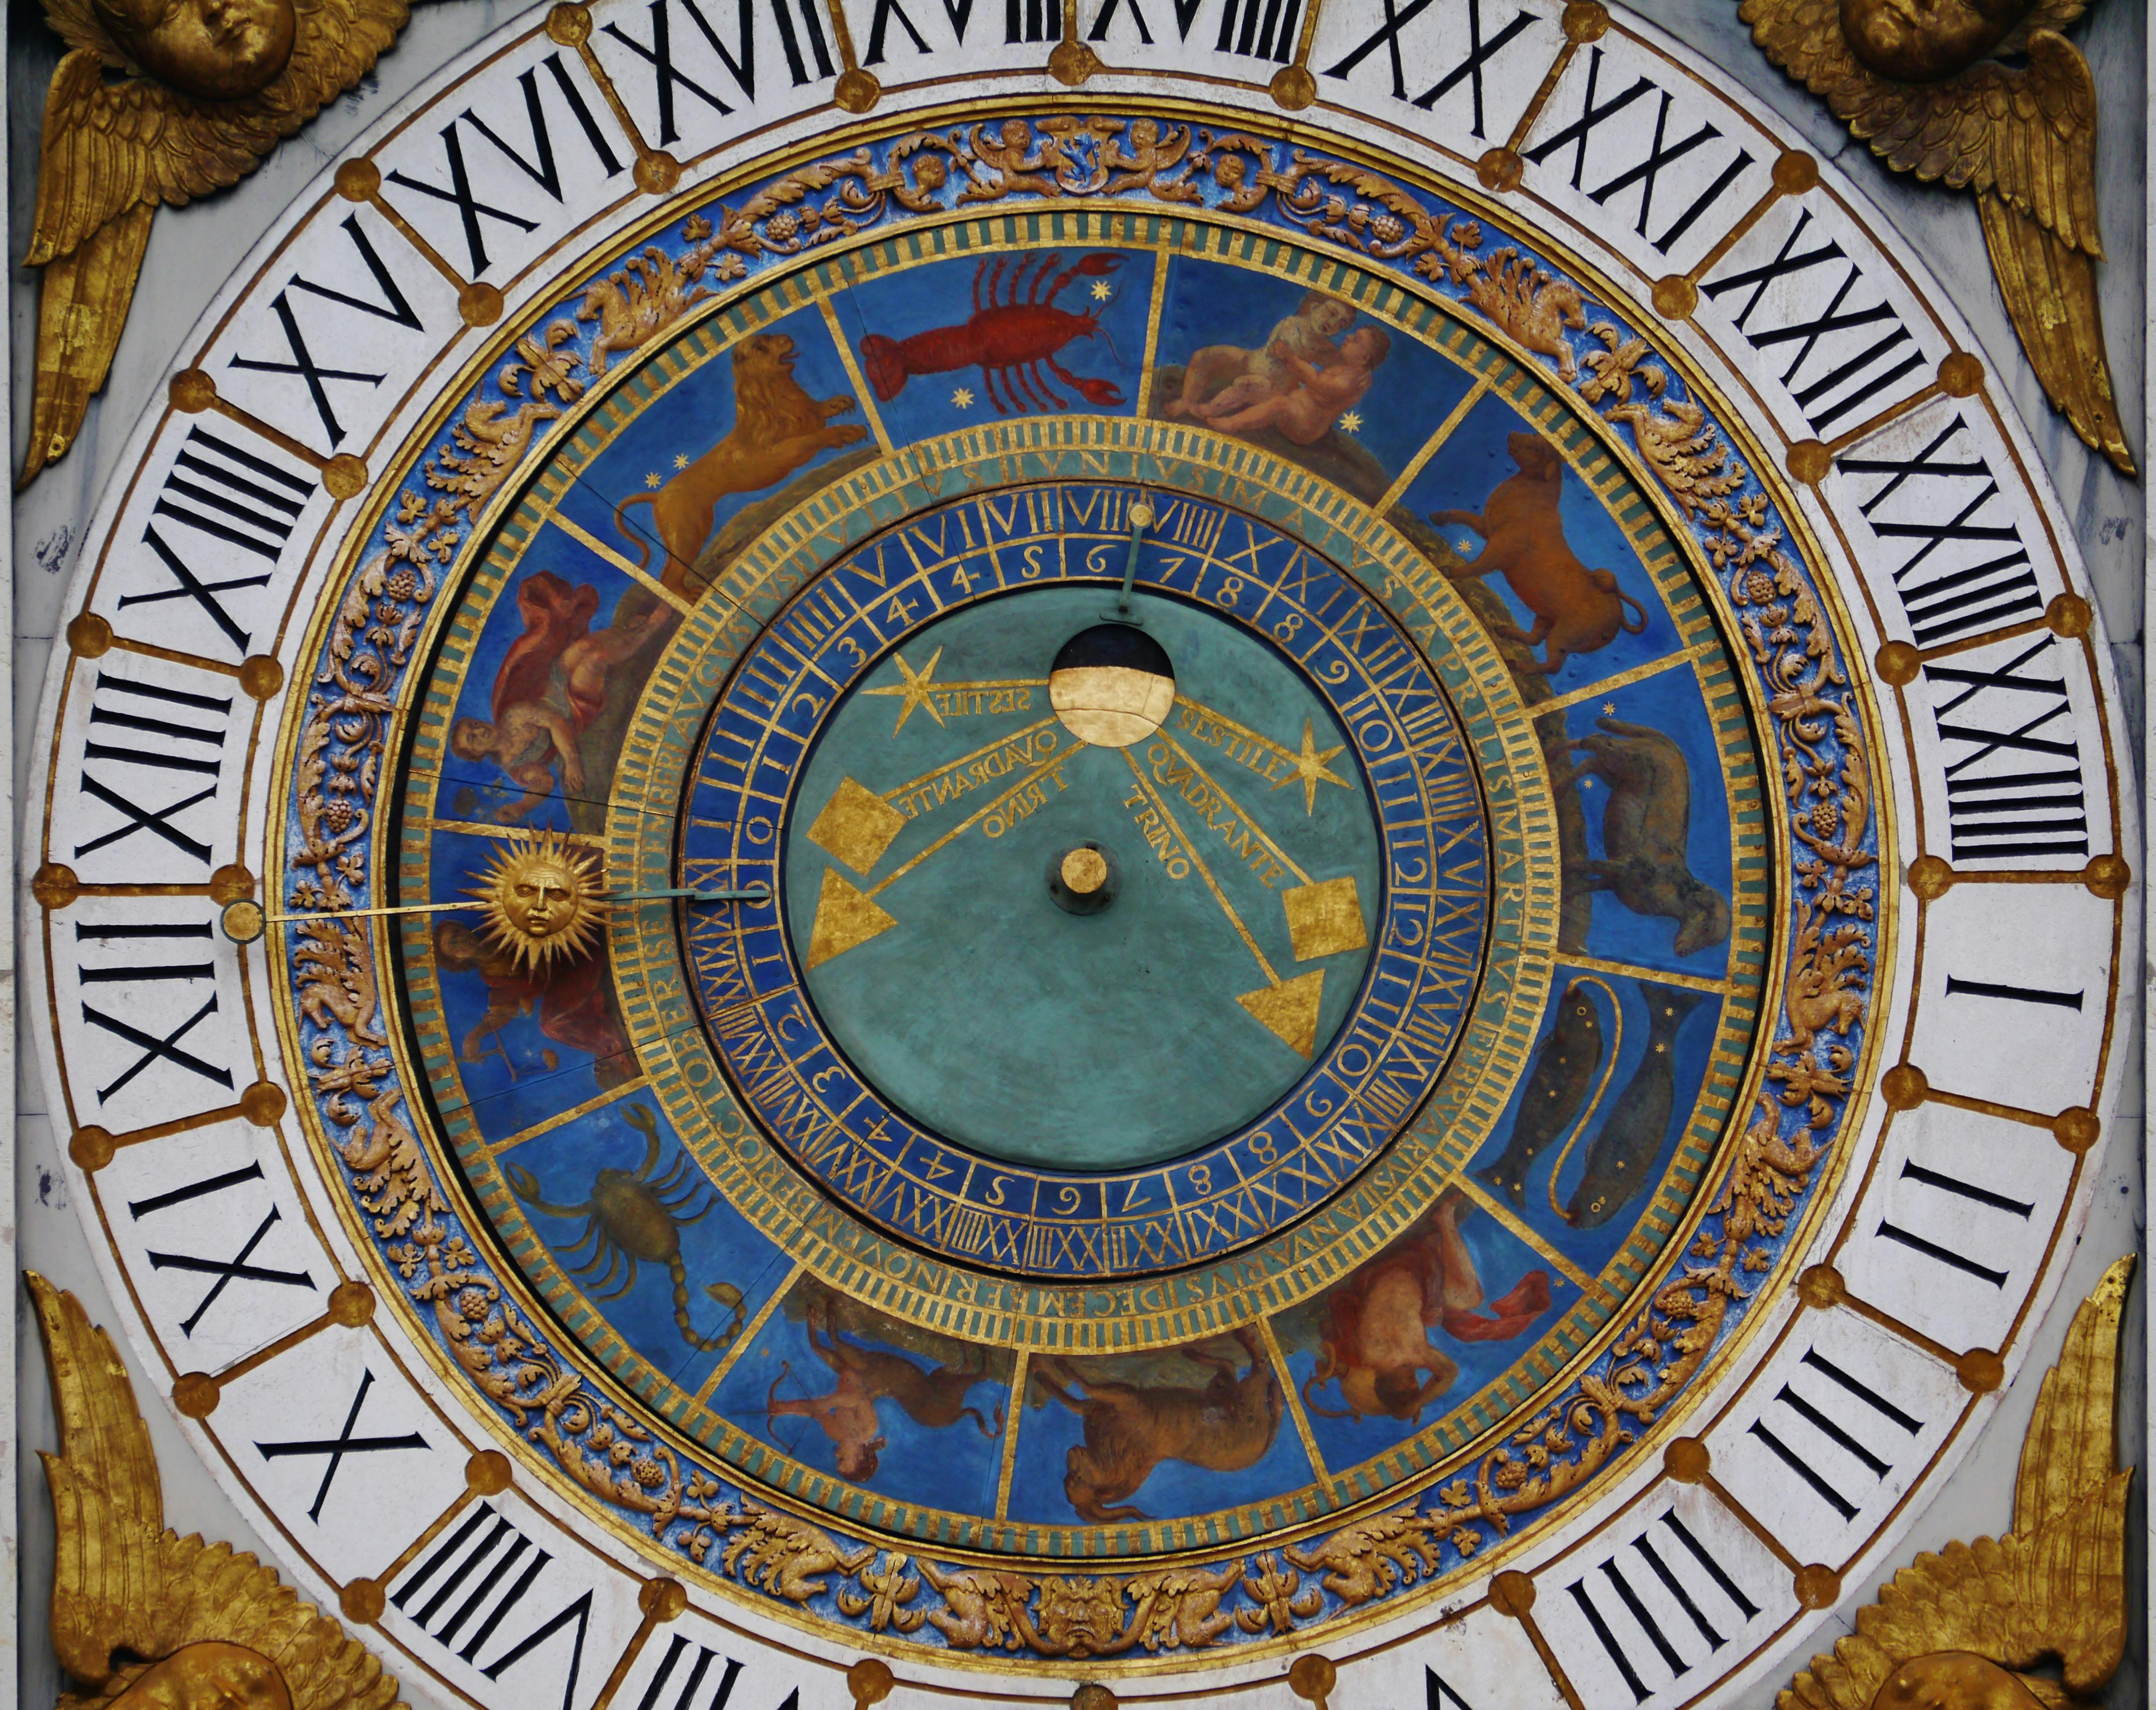 Astral configurations in astrology represent for Jung an example of synchronicity, that is, of a parallel, non-causal relationship between the development of celestial phenomena and those marked by terrestrial time.